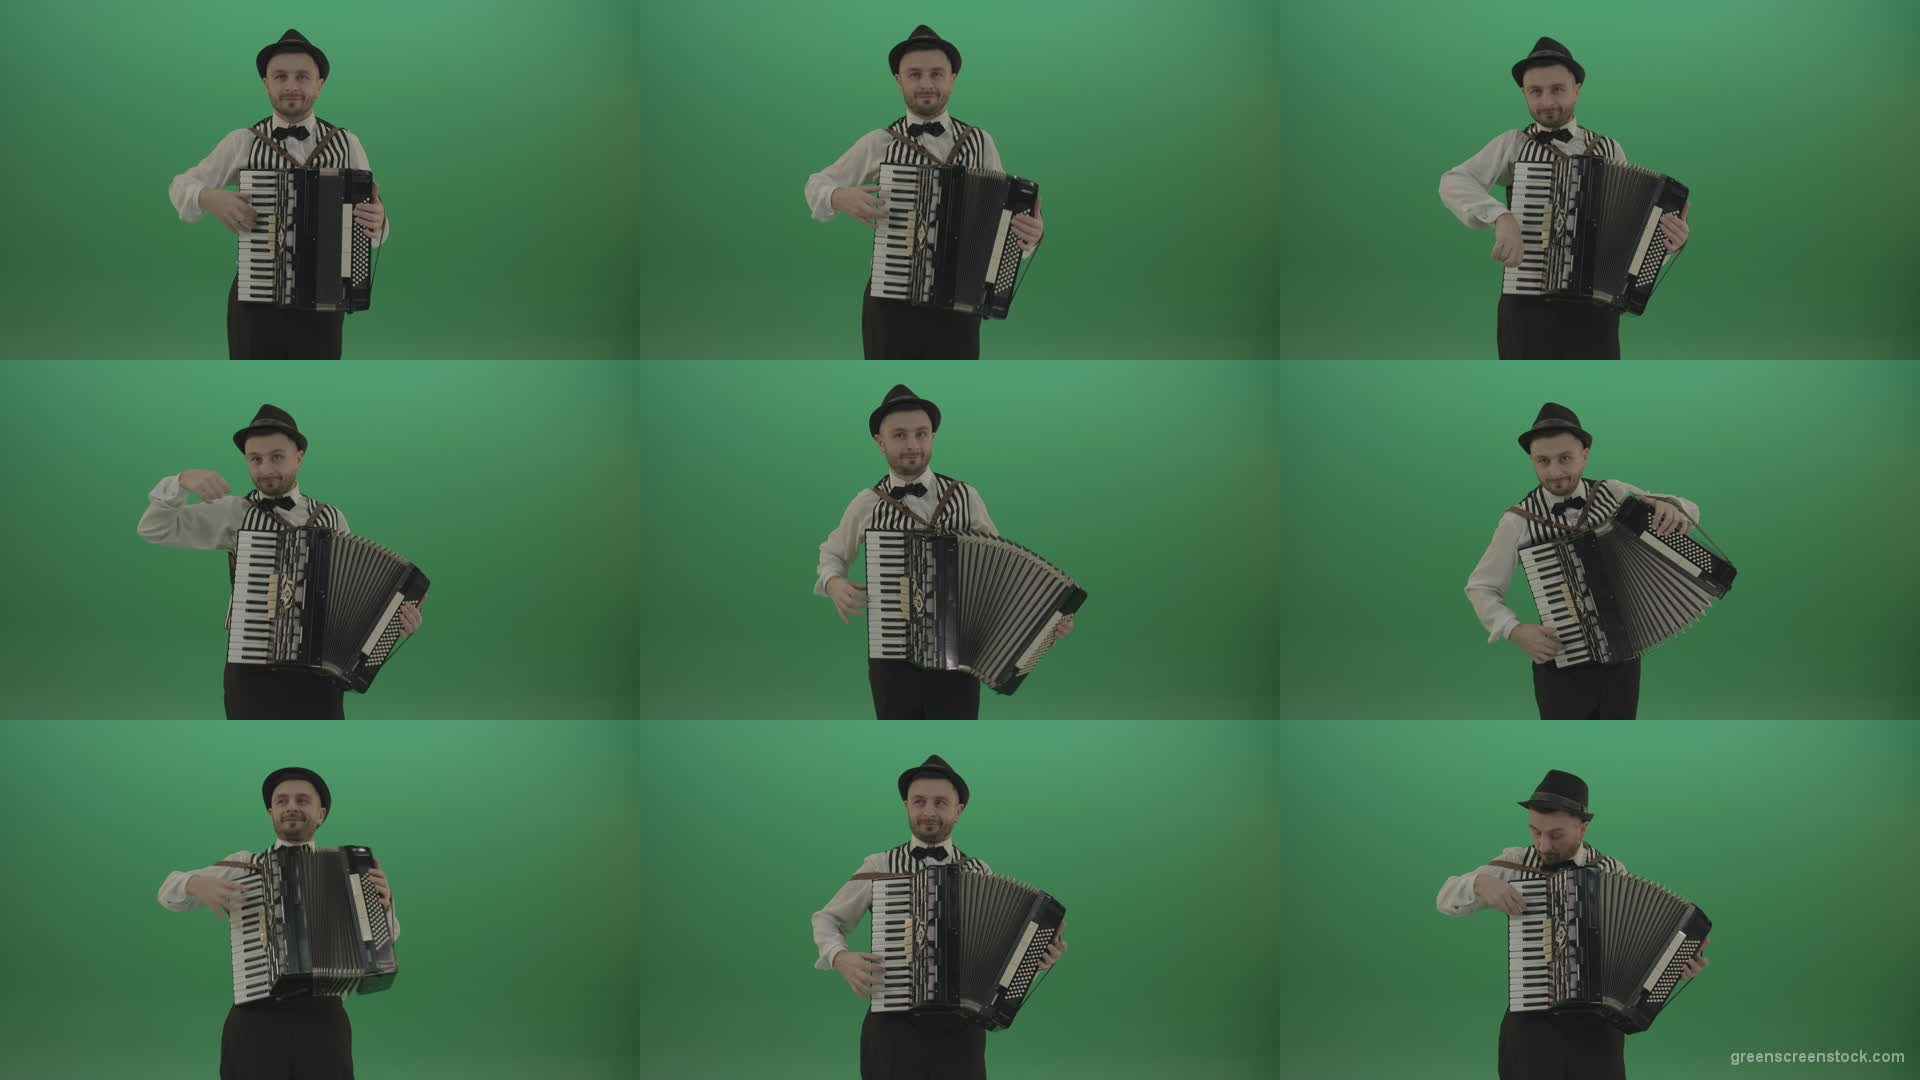 Virtuoso-player-man-with-Accordion-isolated-on-green-screen-in-front-view-1 Green Screen Stock